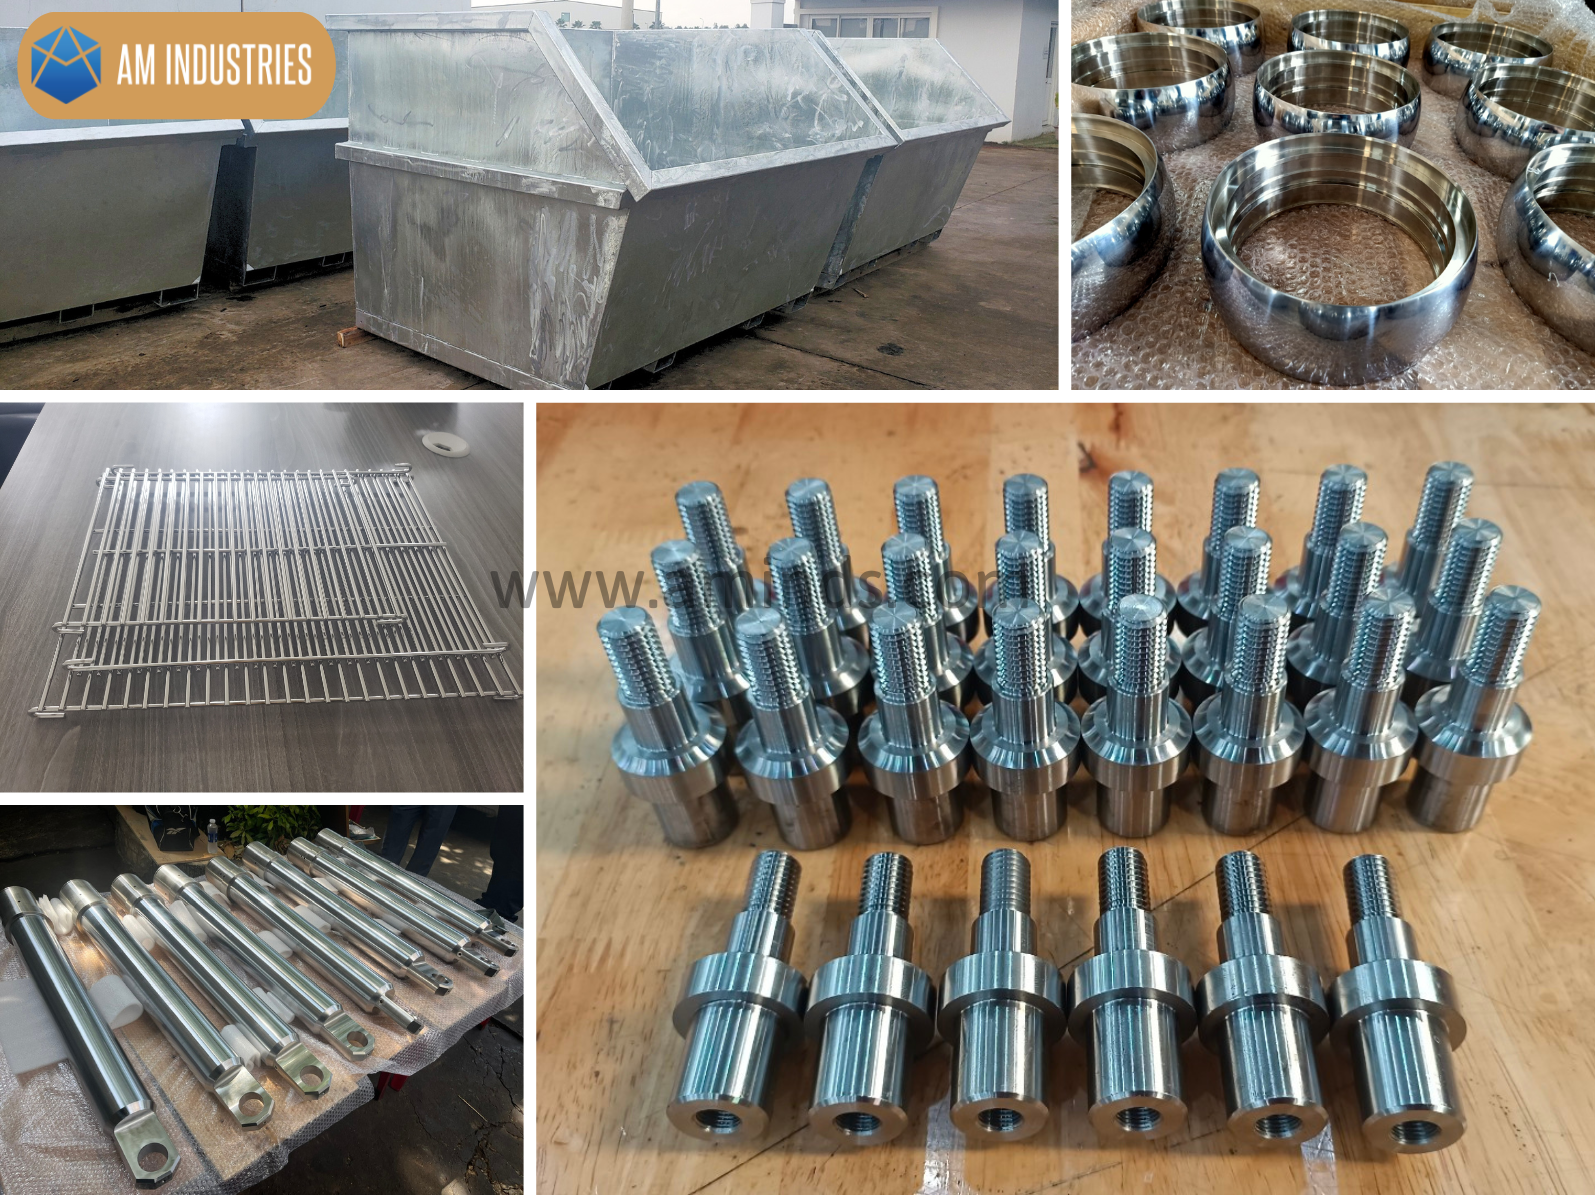 Stainless Steel Components At AM Industries Vietnam